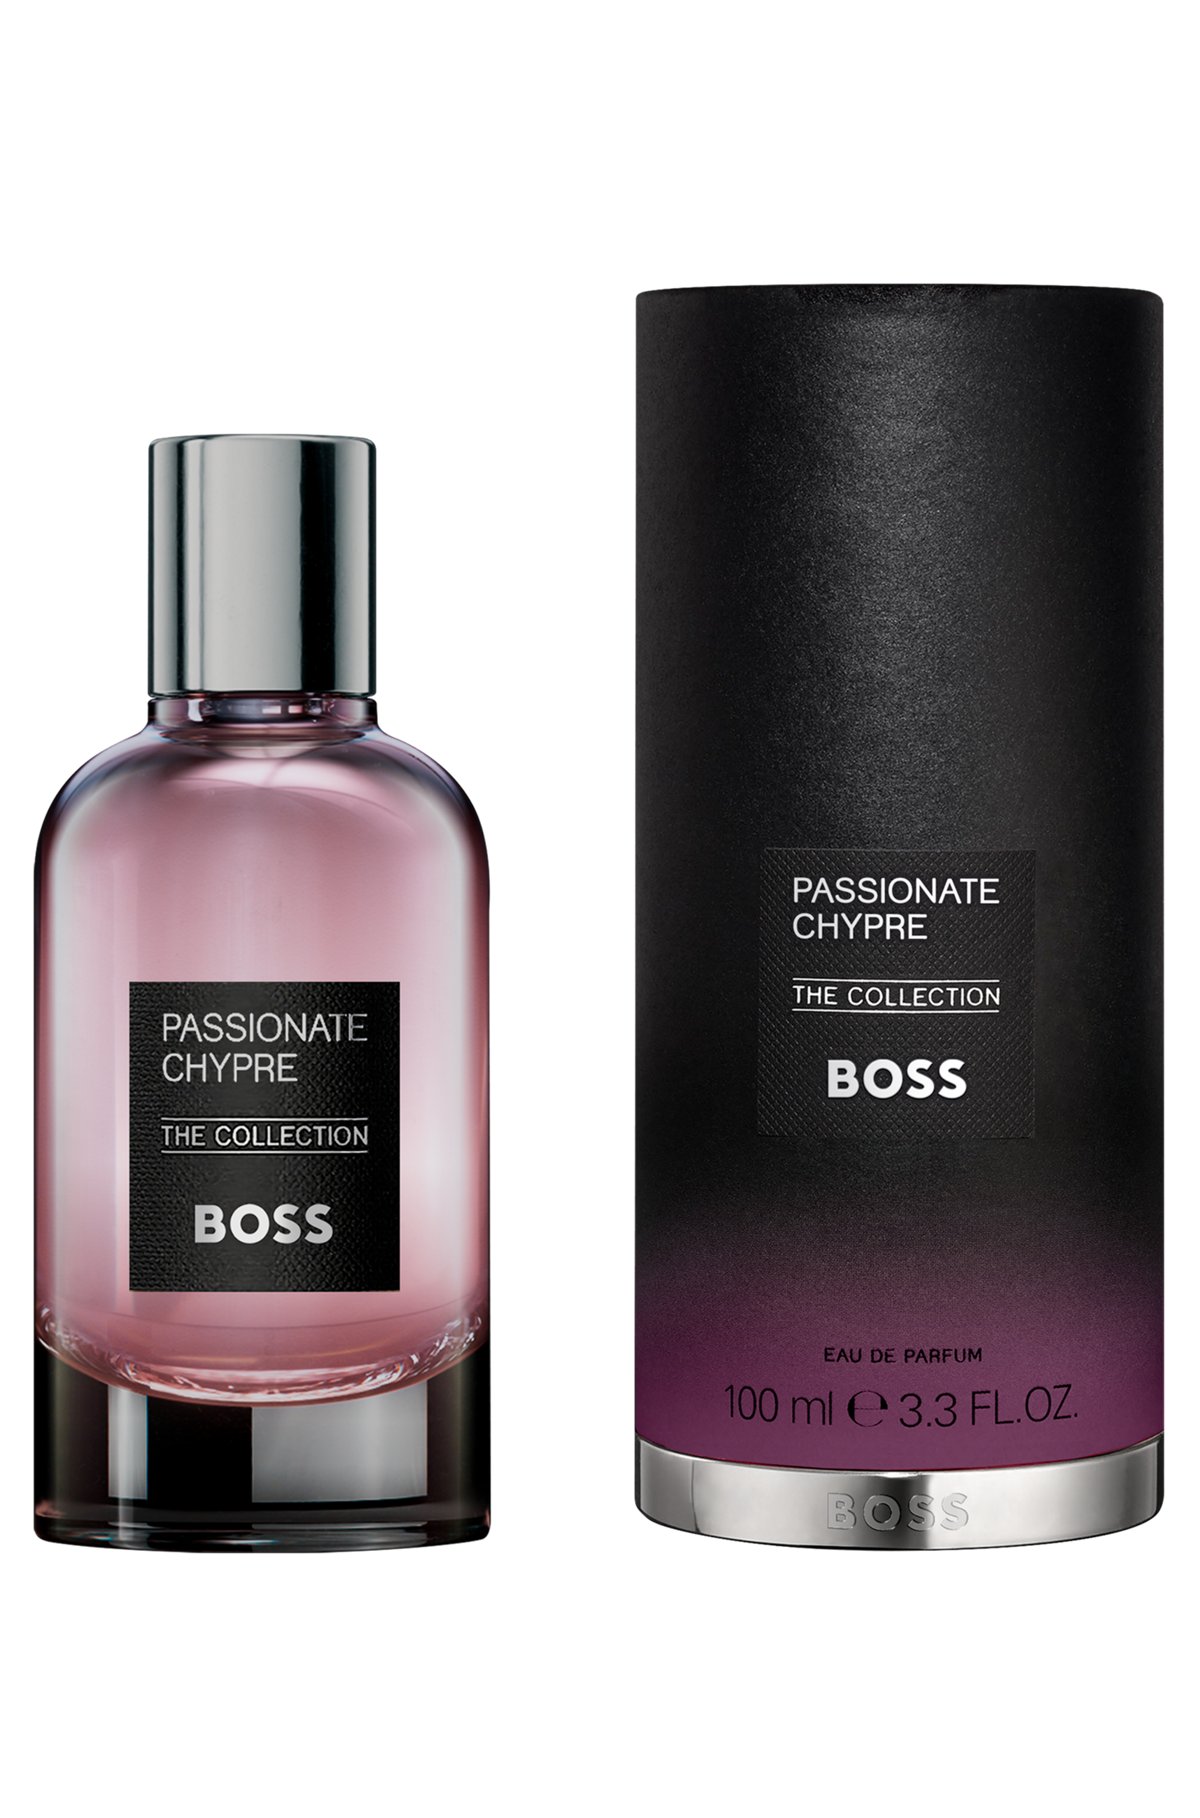 Hugo Boss The Collection Passionate Chypre, edp 100ml